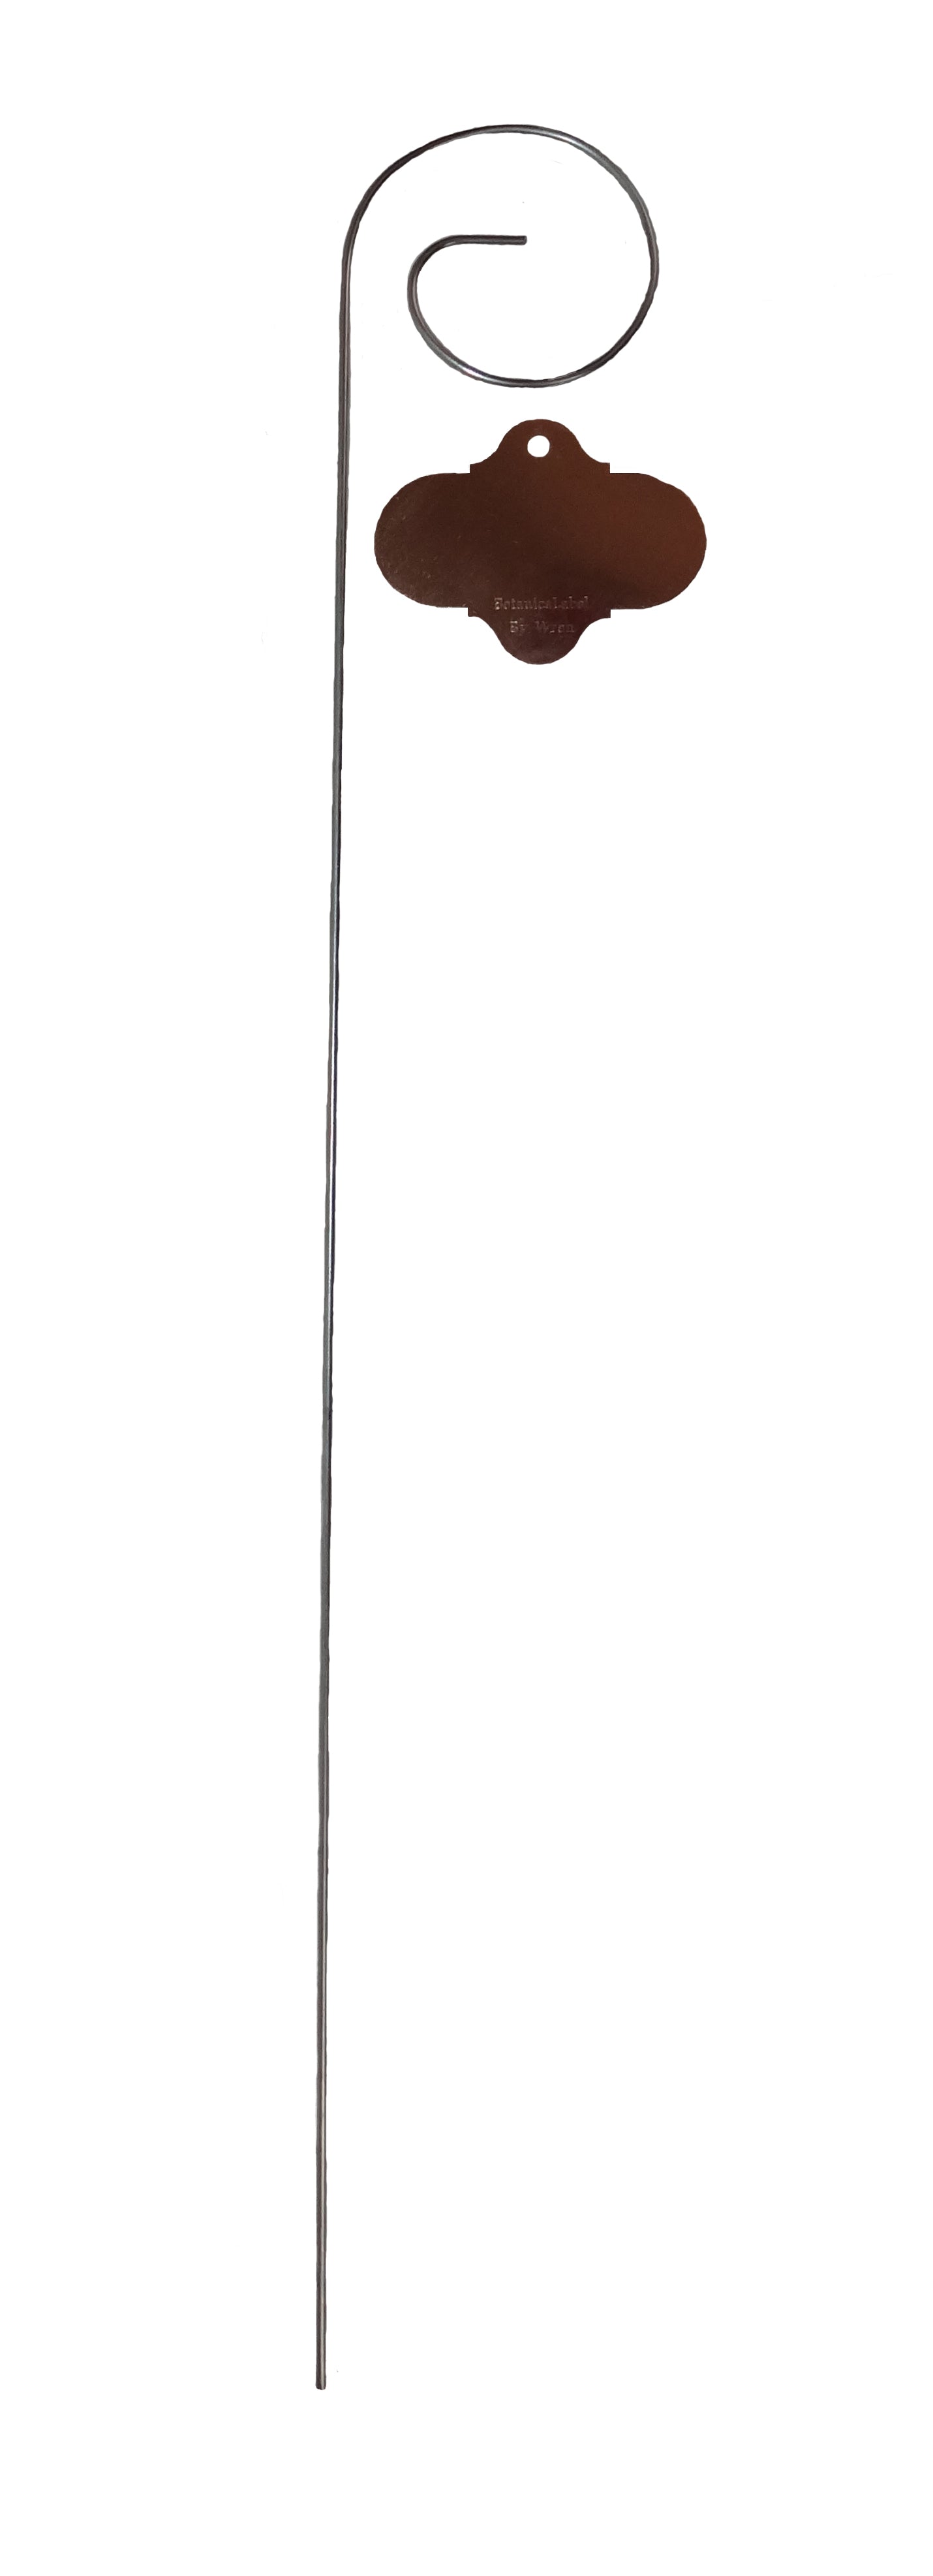 24" Wren Garden Stake with Copper Plated Tag